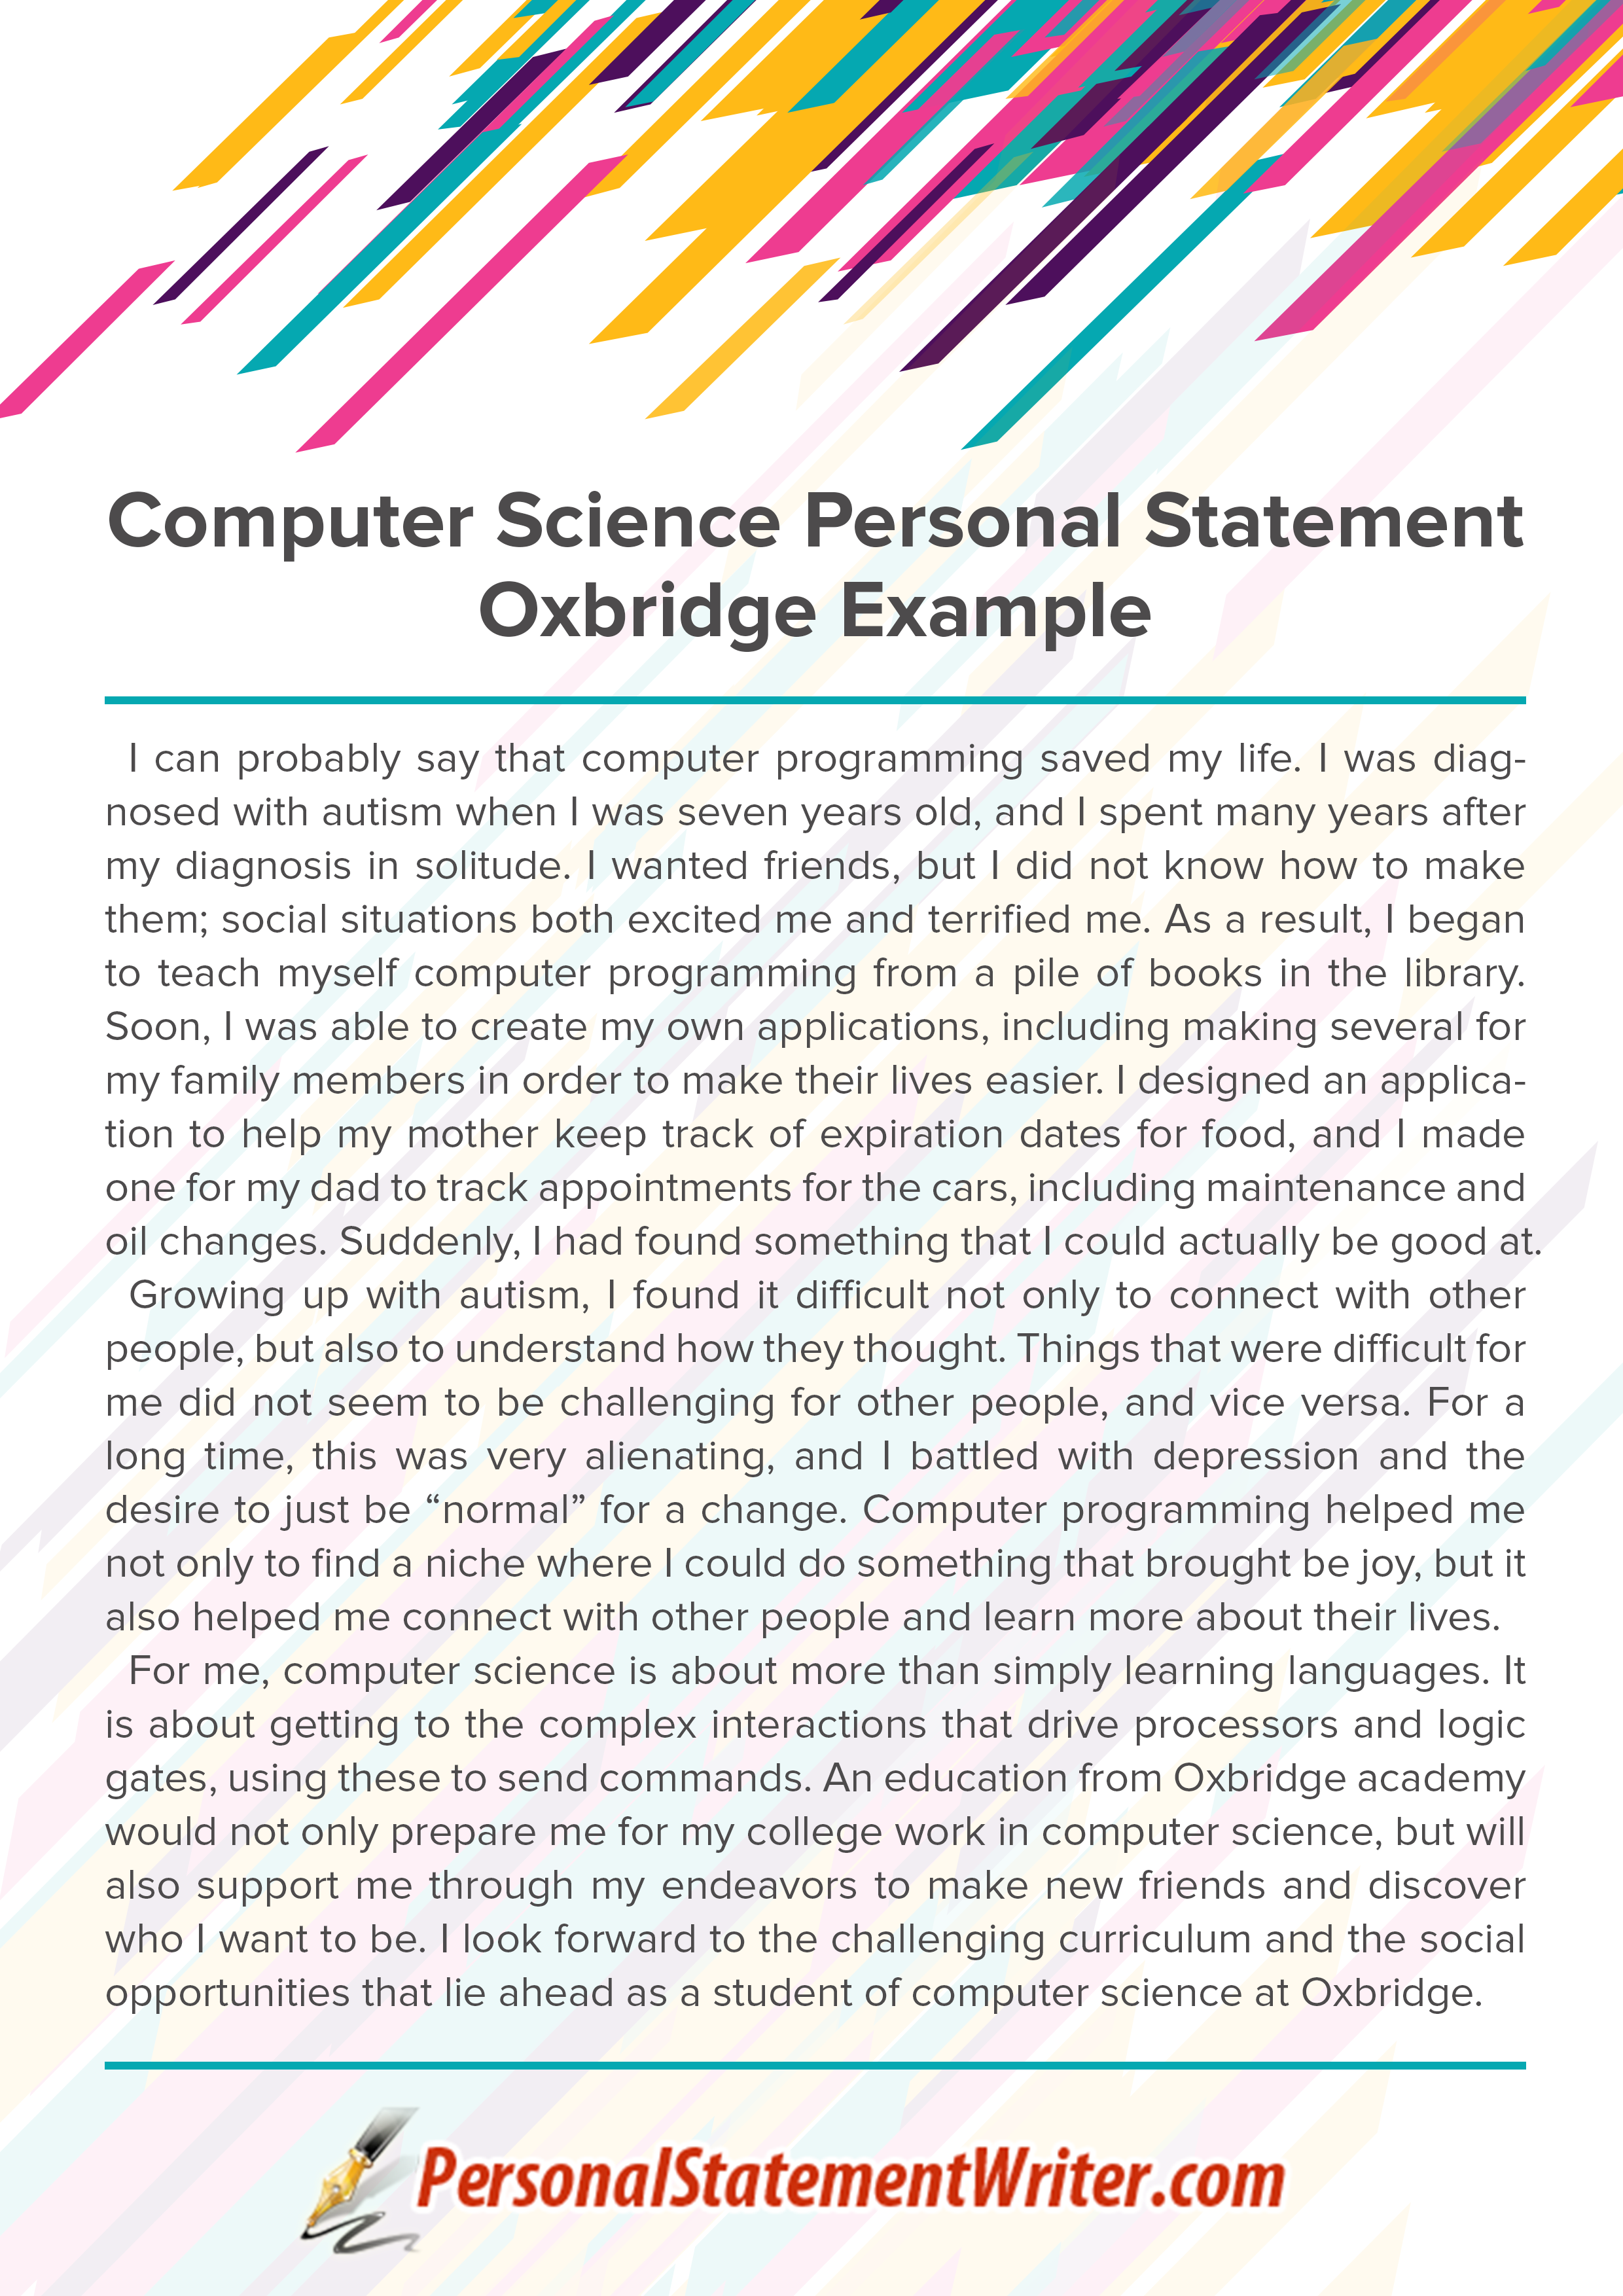 computer science personal statement for university